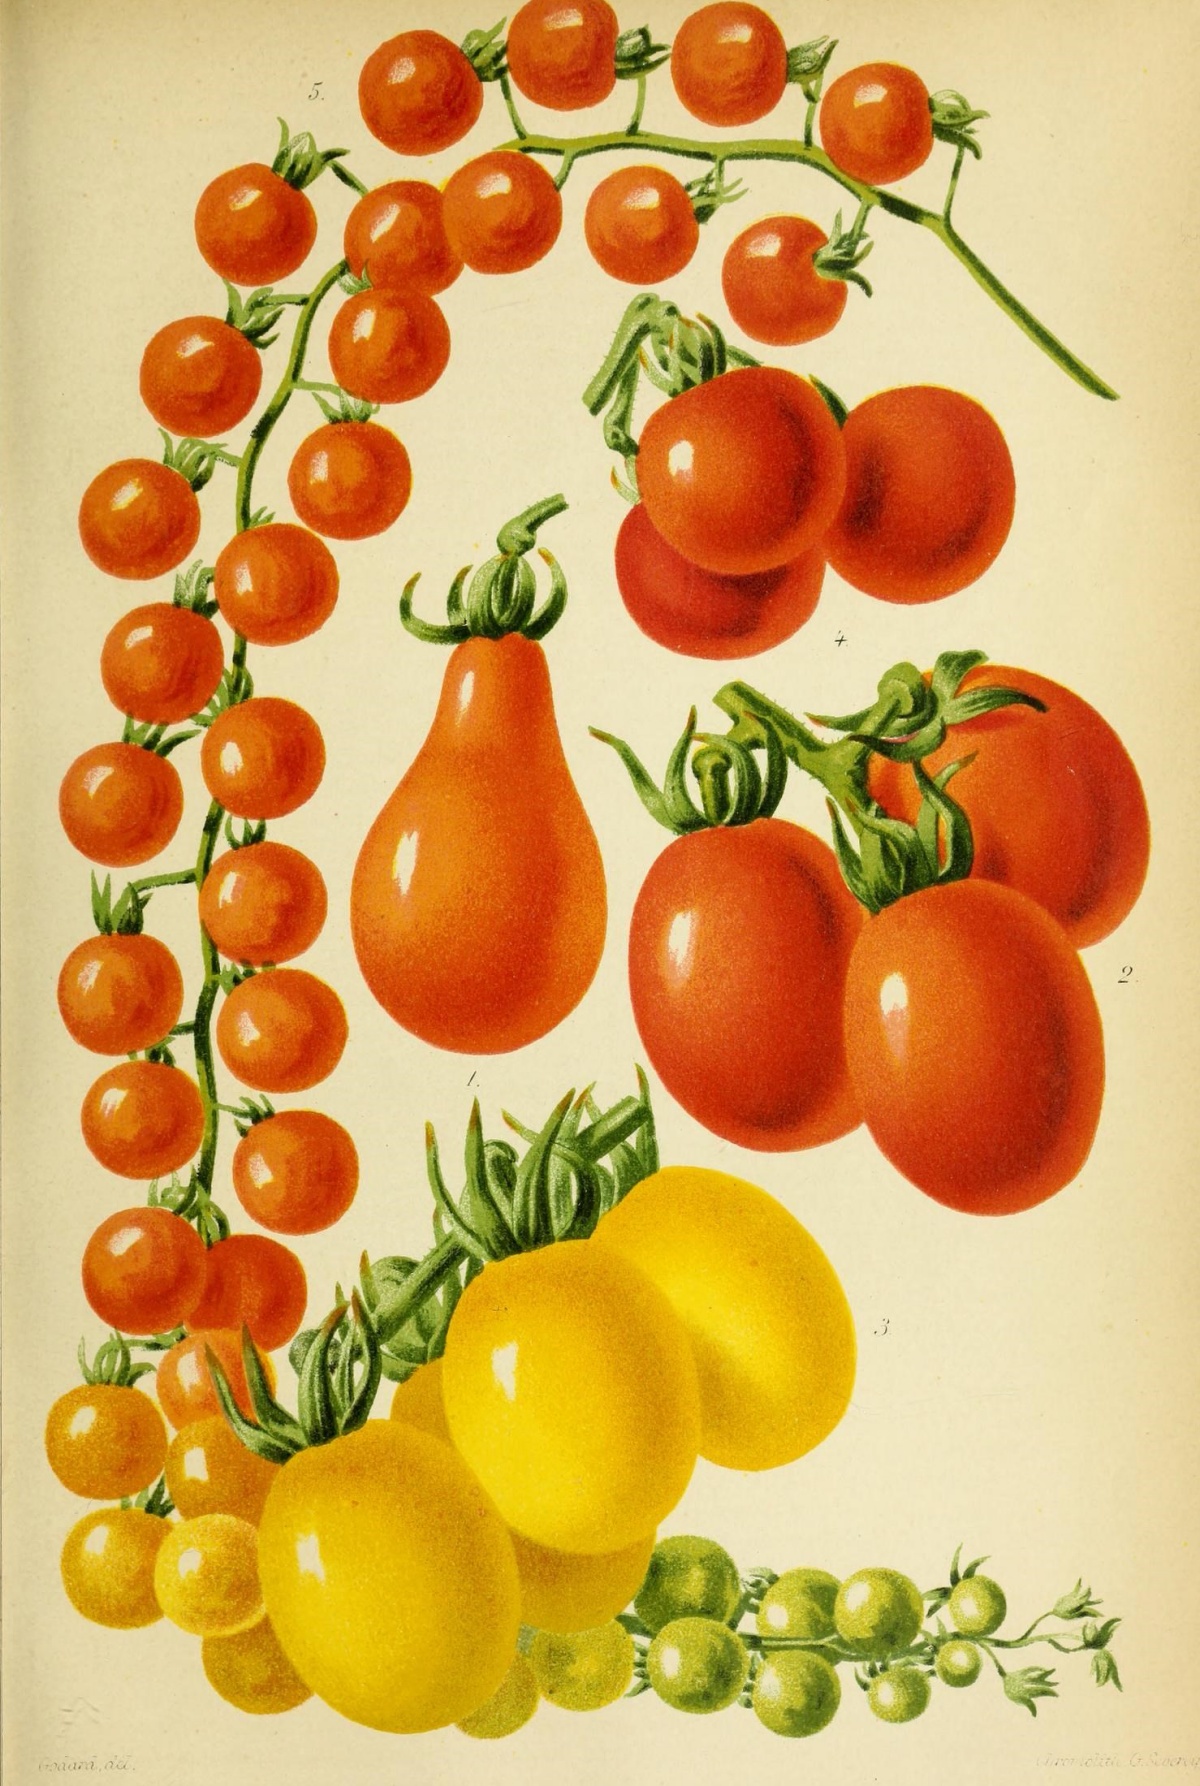 plum and cherry tomatoes from old French gardening book